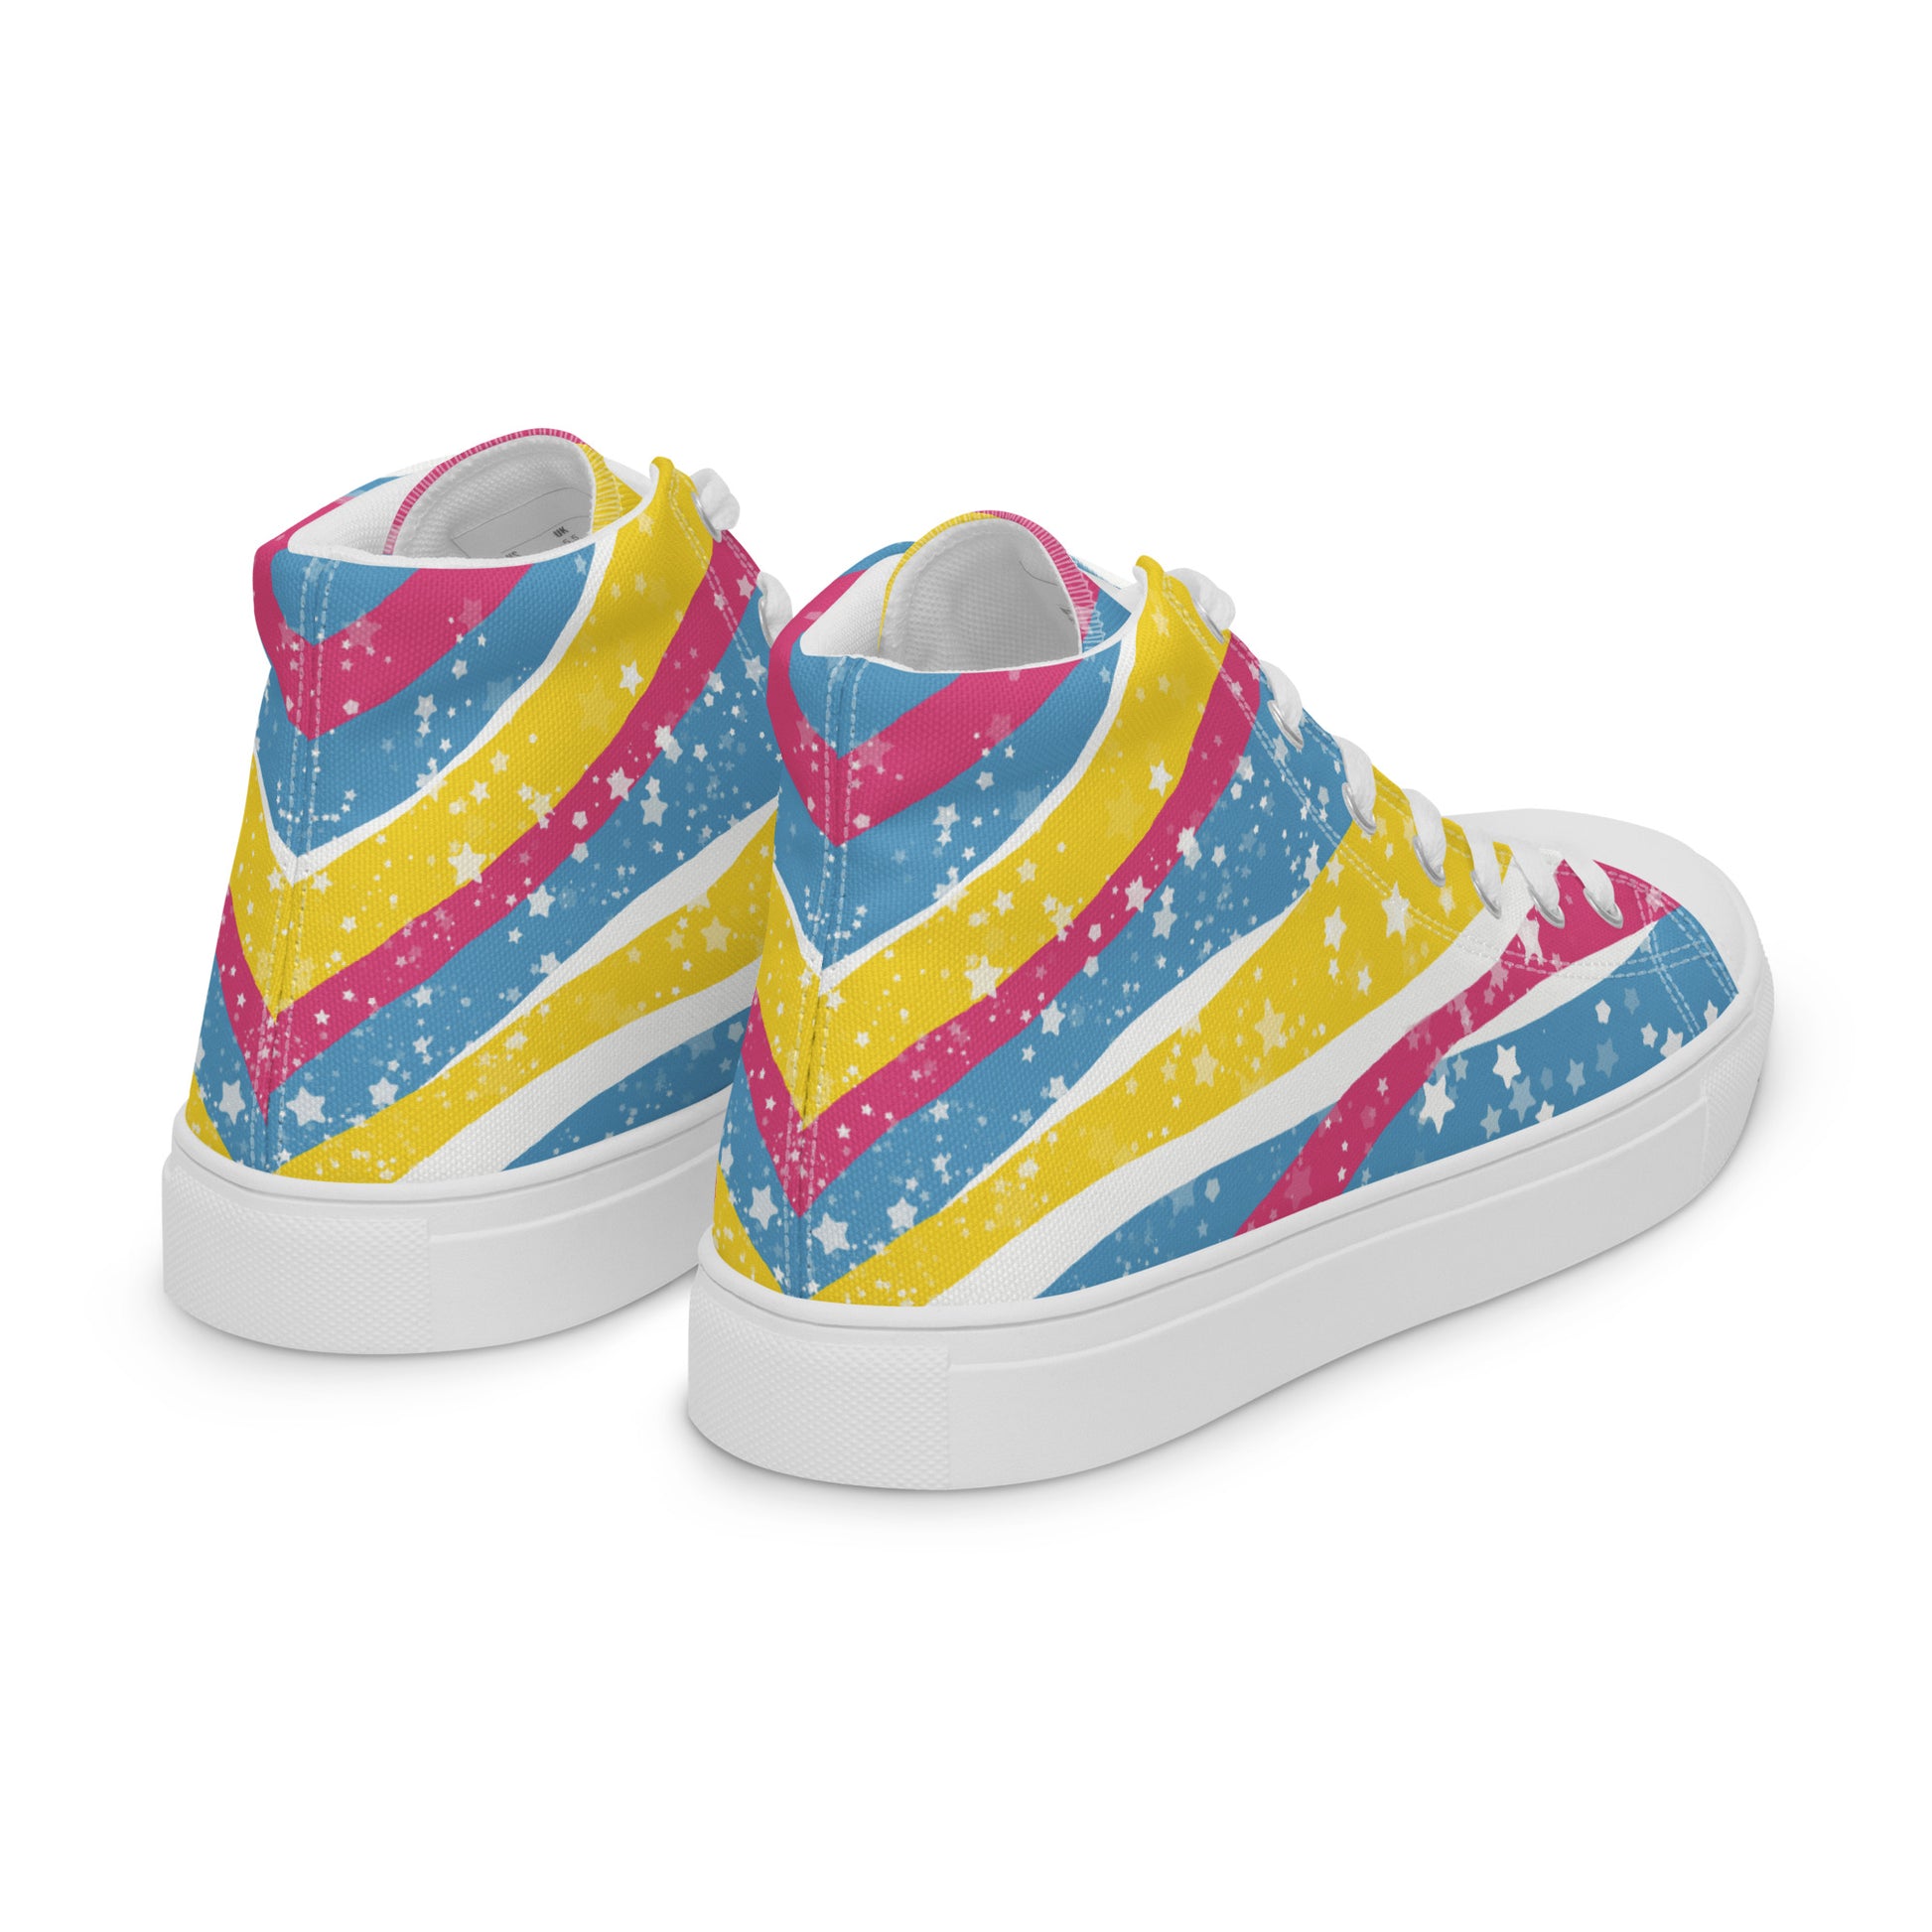 Right back view: a pair of high top shoes with pink, yellow, and blue ribbons that get larger from heel to laces, white stars, and the Aras Sivad logo on the tongue.